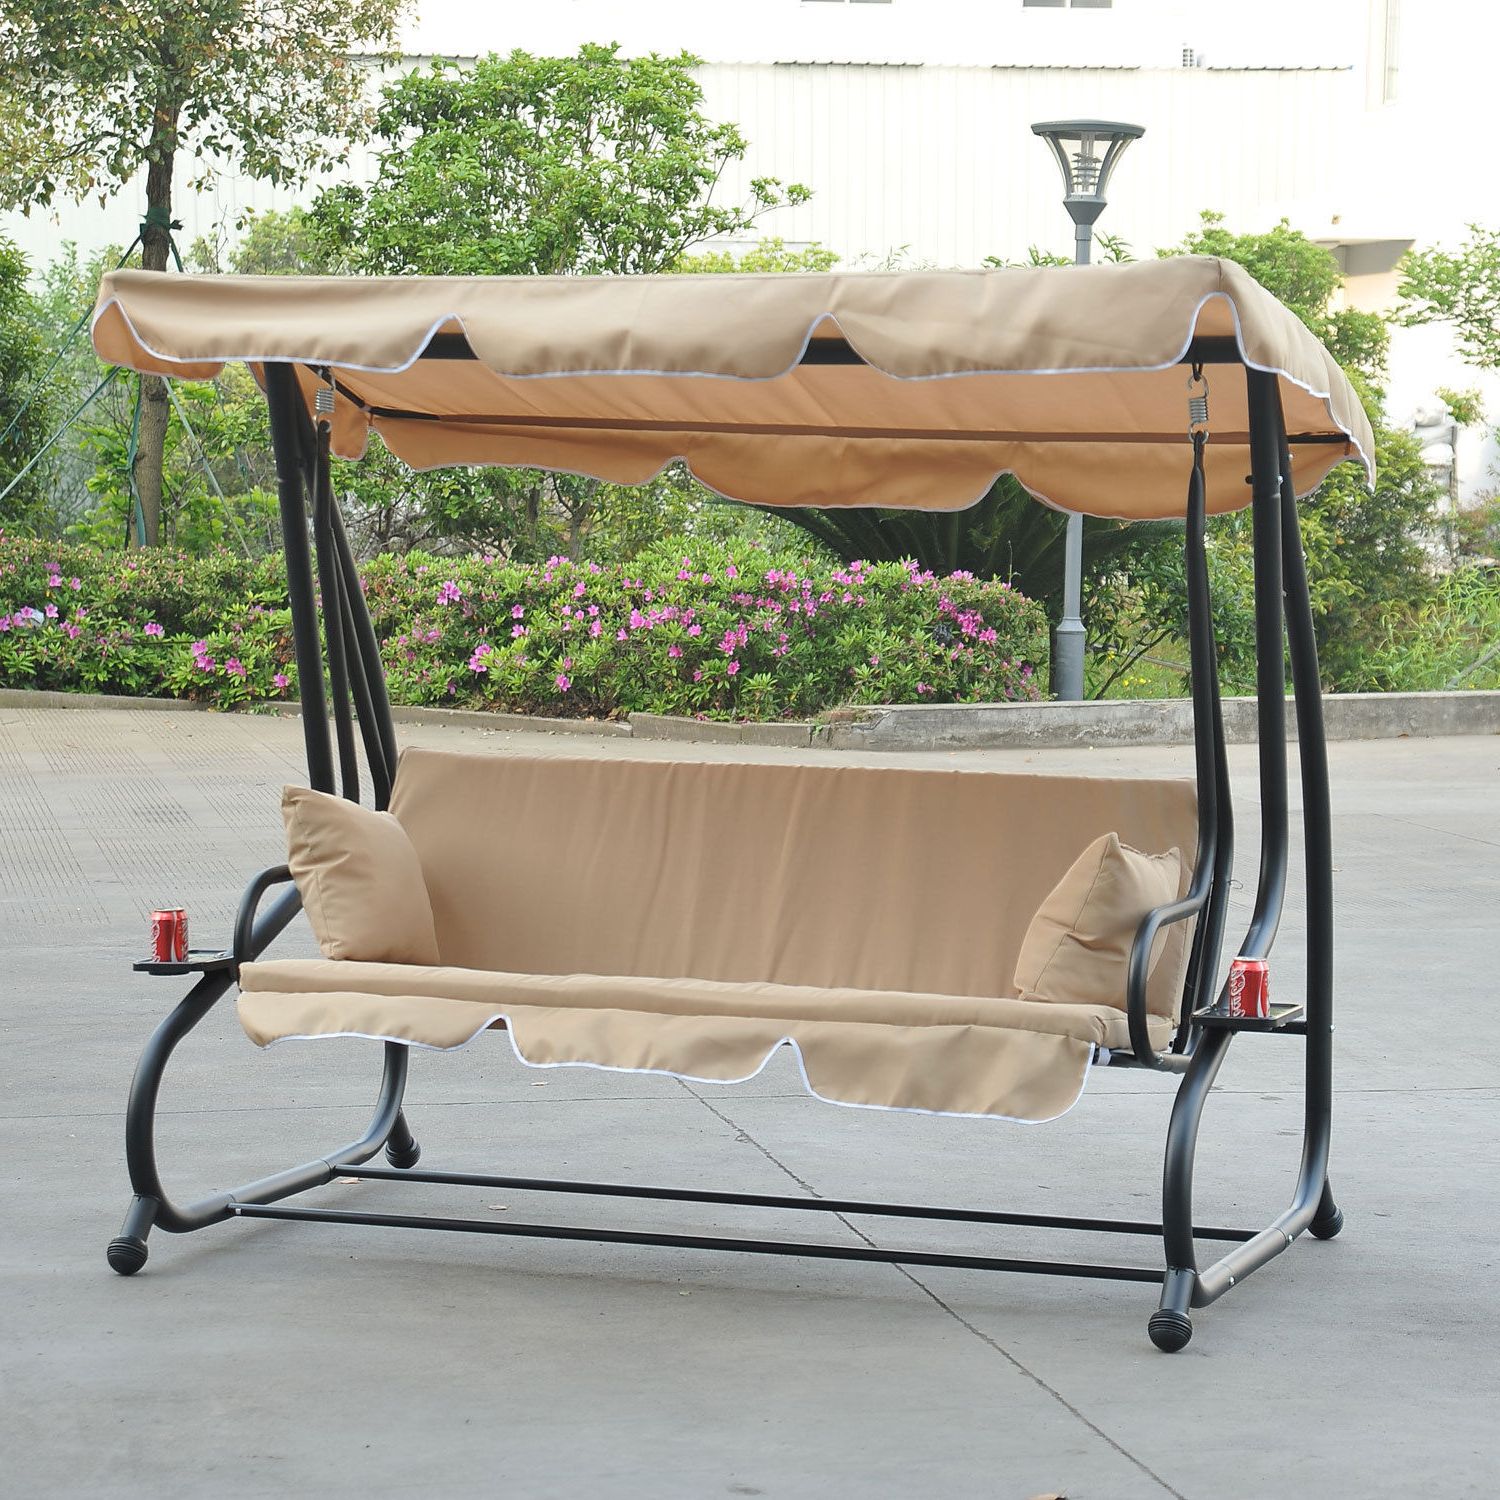 Details About Outdoor 3 Person Patio Porch Swing Hammock Bench Canopy  Loveseat Convertible Bed Inside 2020 Porch Swings With Canopy (View 30 of 30)